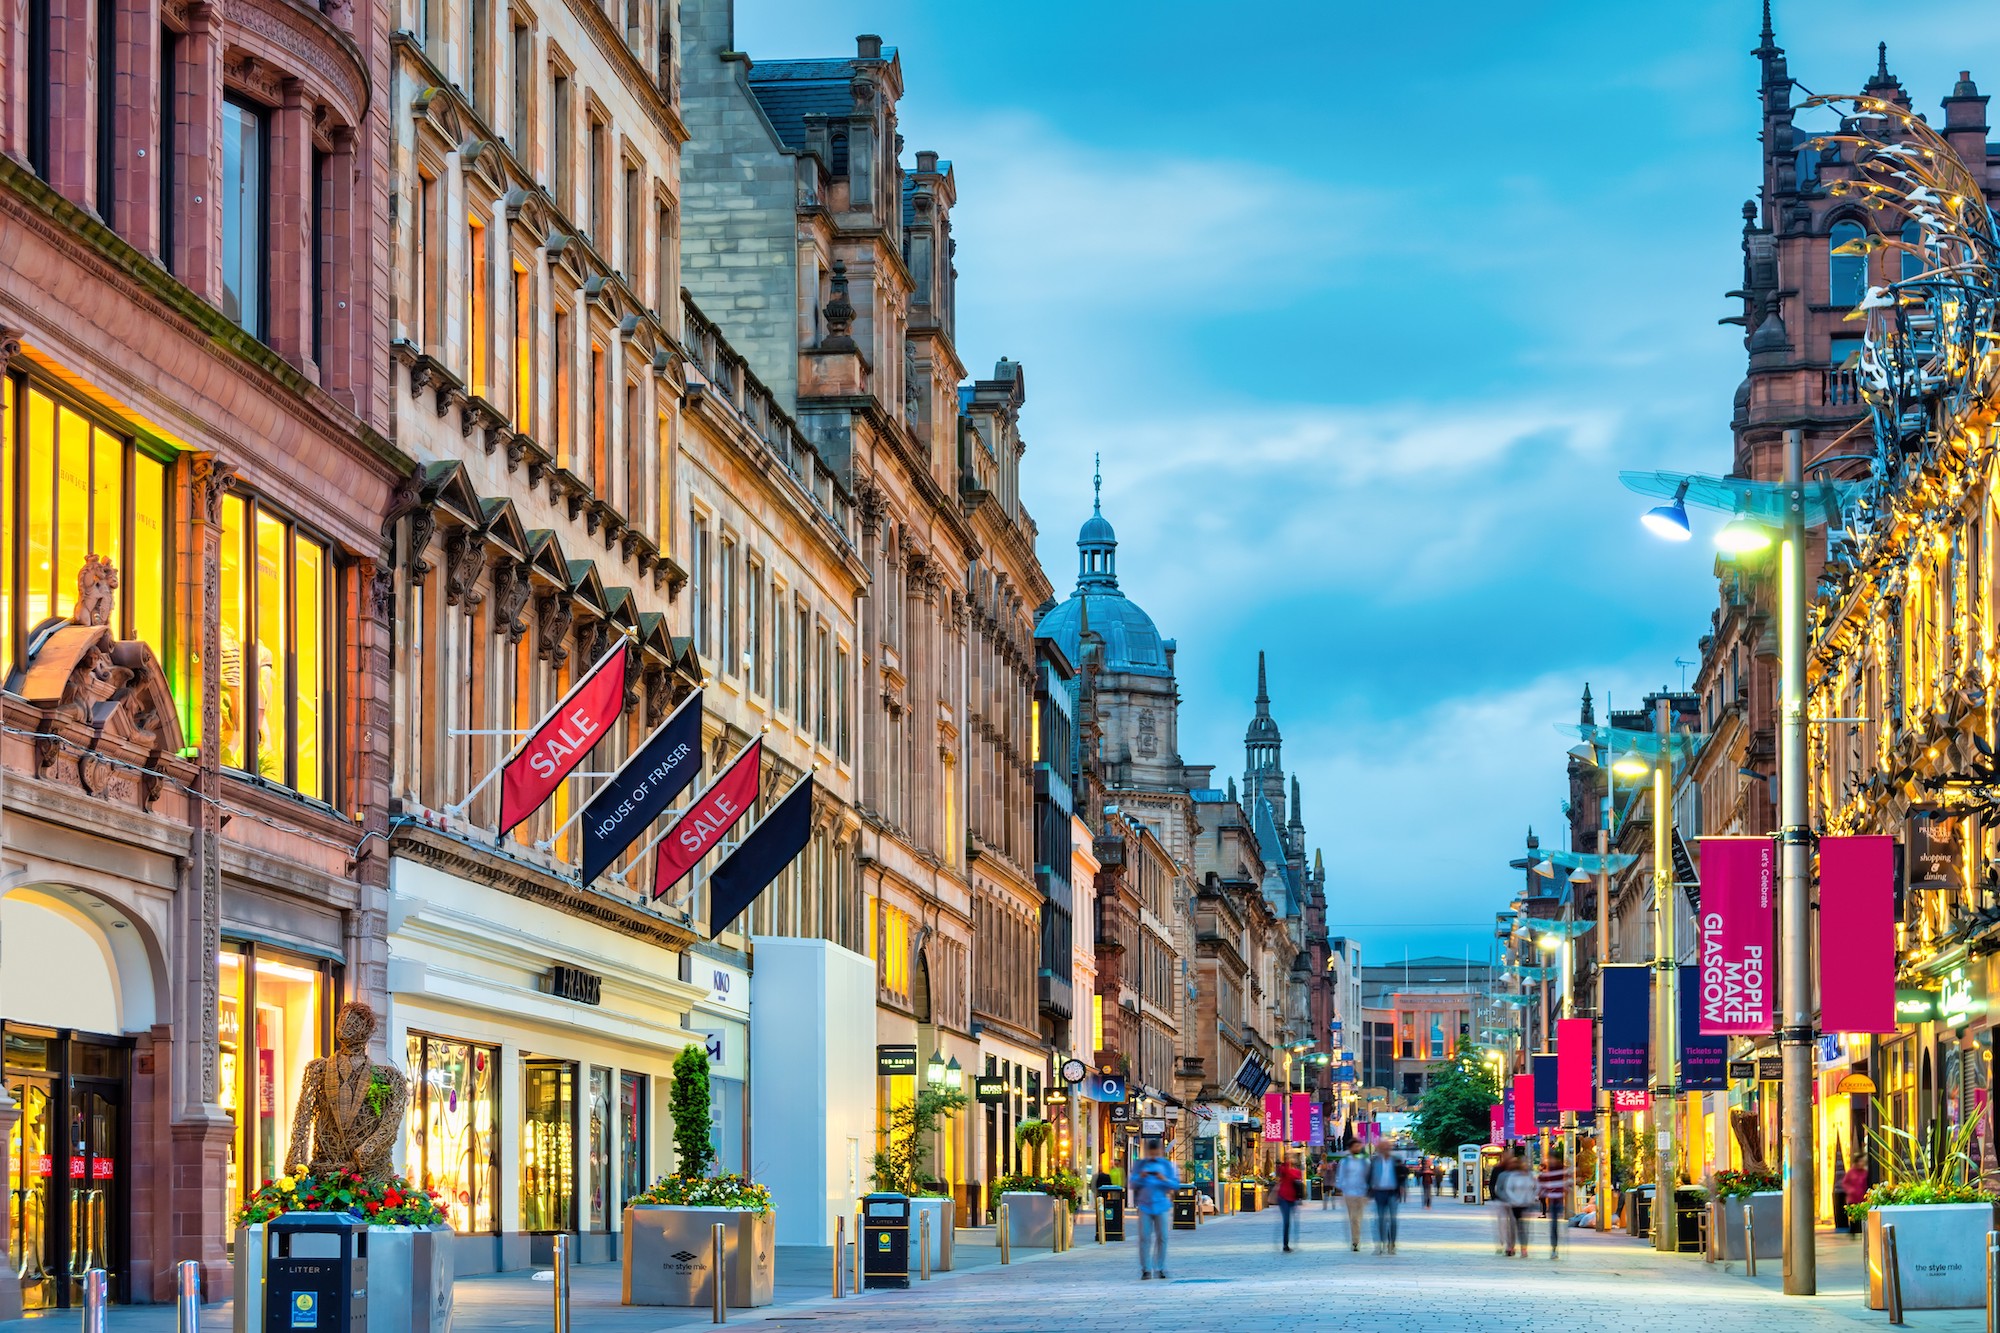 Investment opportunities emerge in Scotland’s retail market